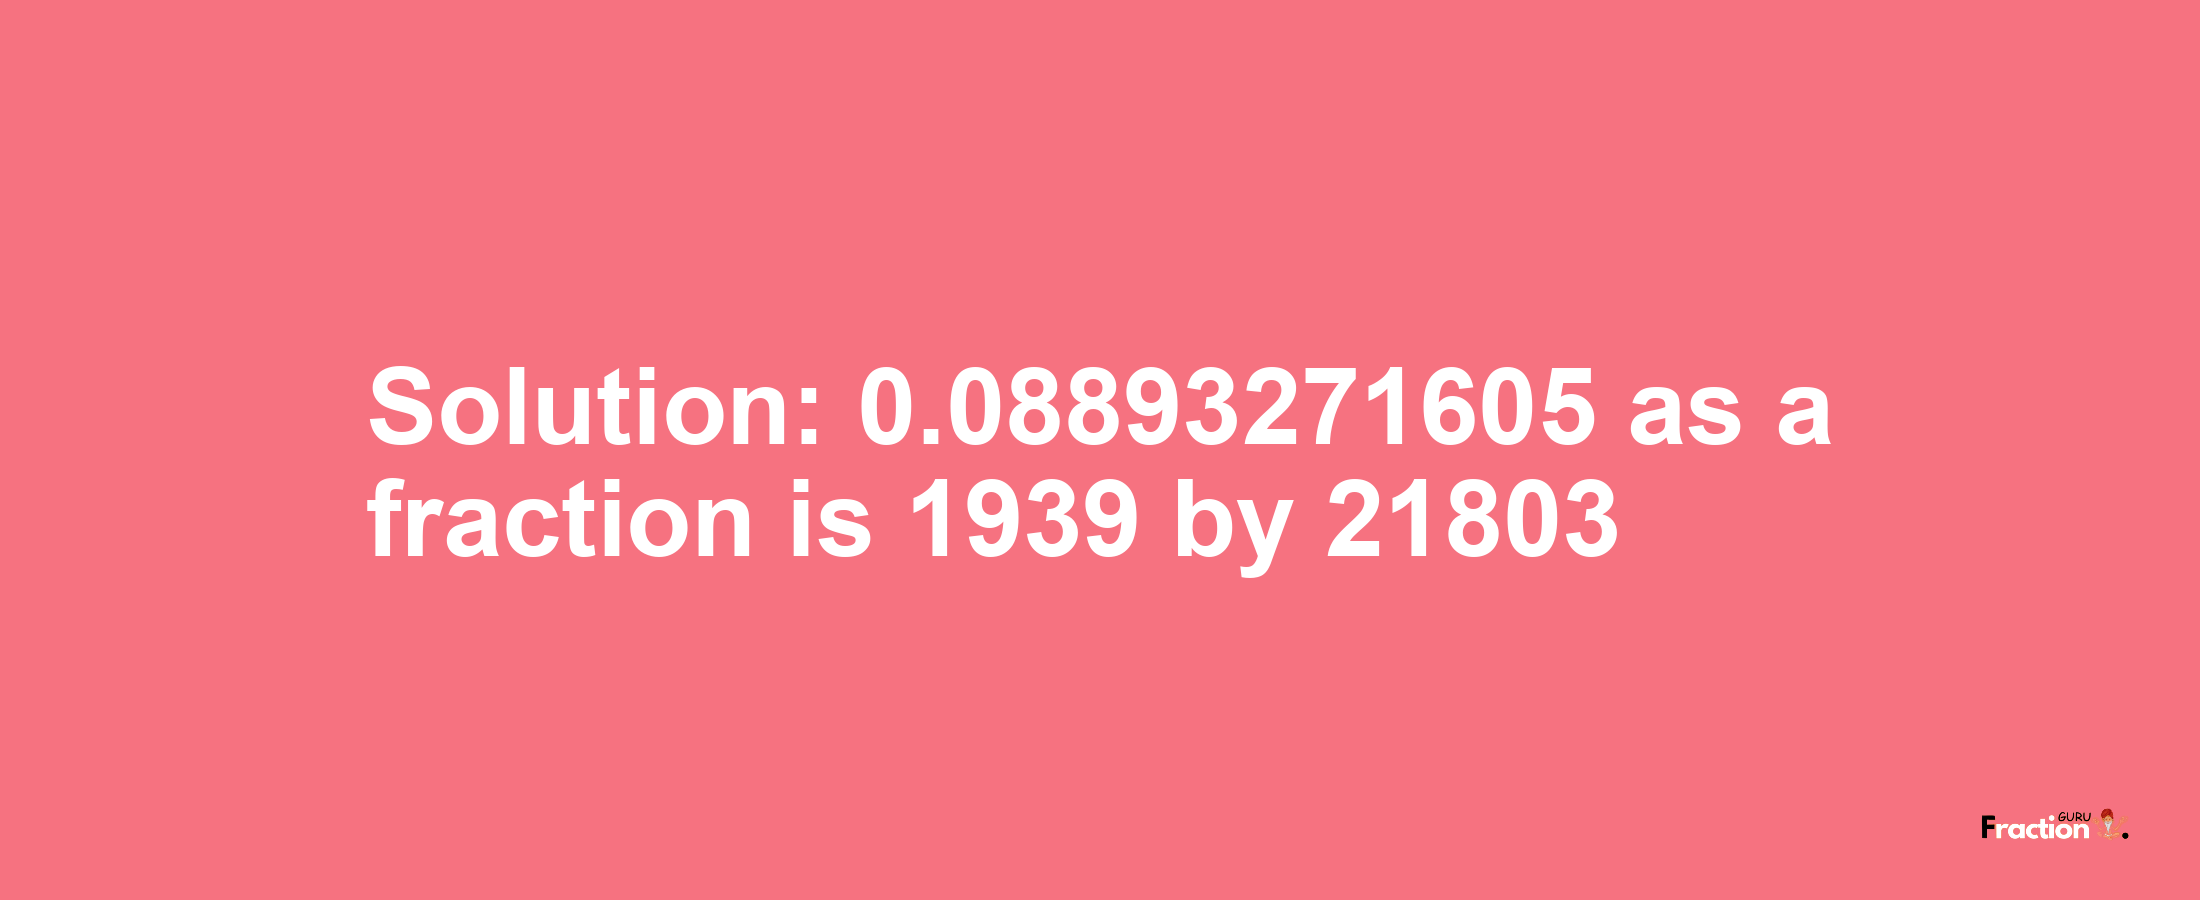 Solution:0.08893271605 as a fraction is 1939/21803